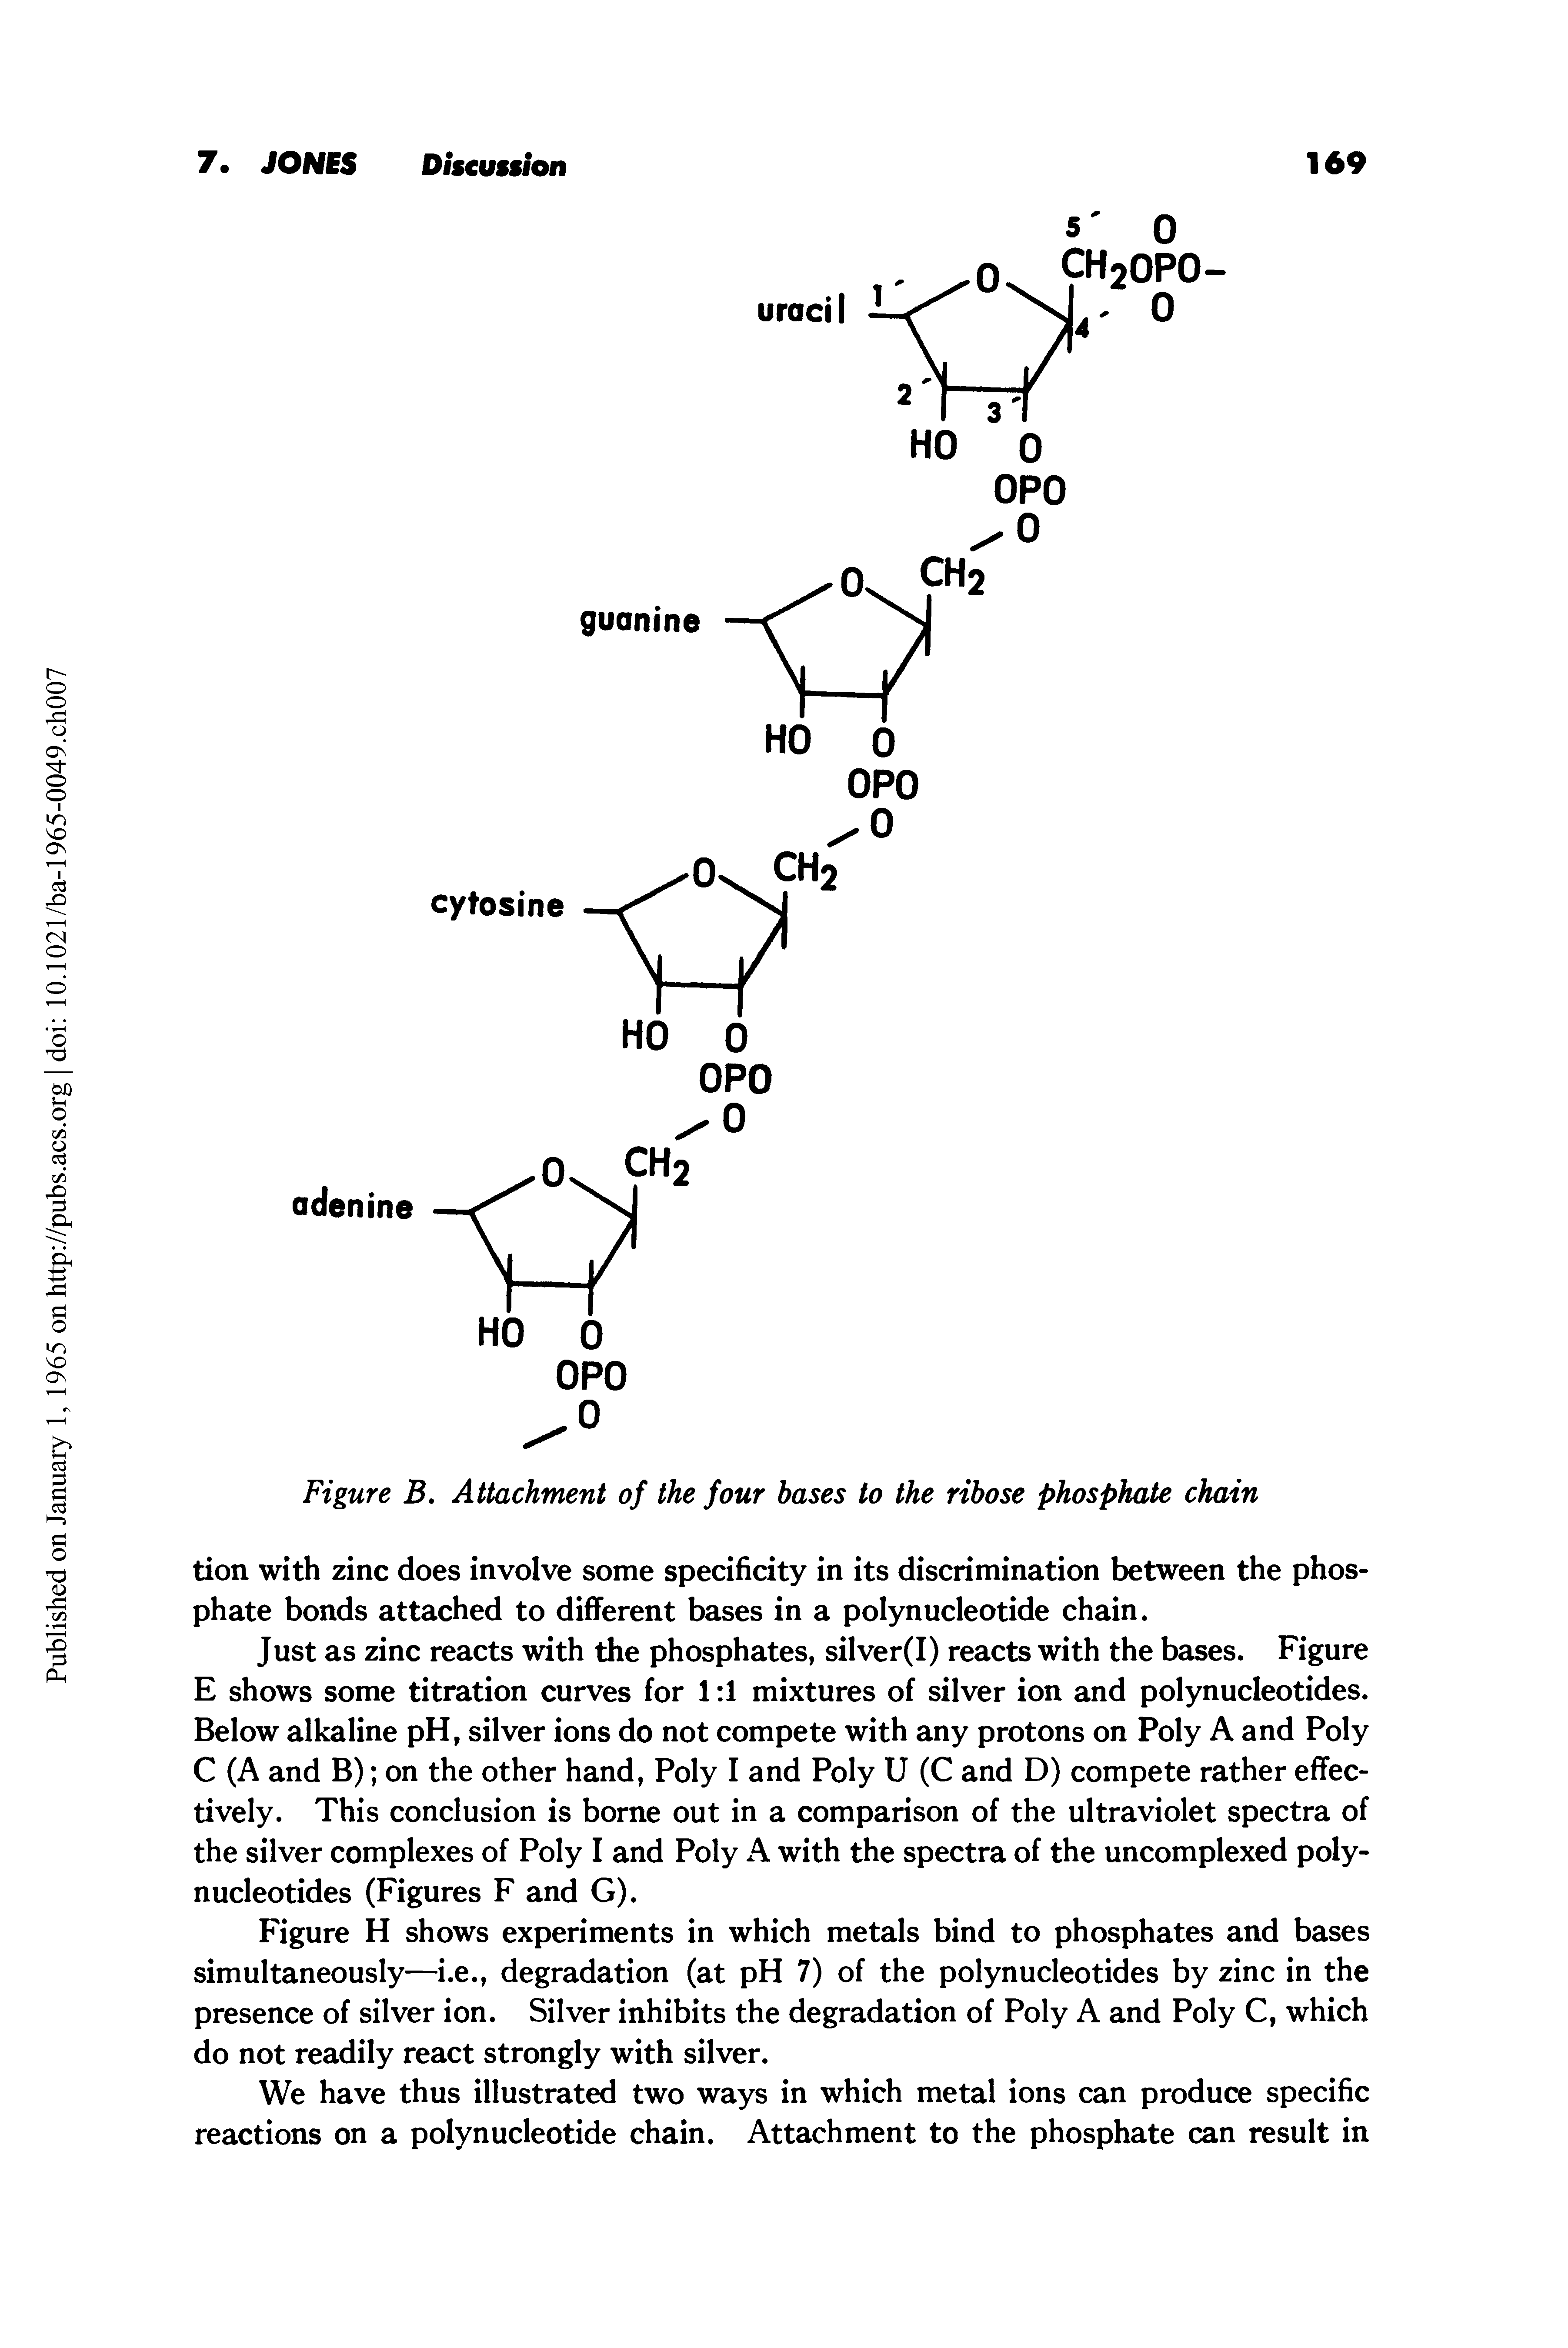 Figure B. Attachment of the four bases to the ribose phosphate chain...